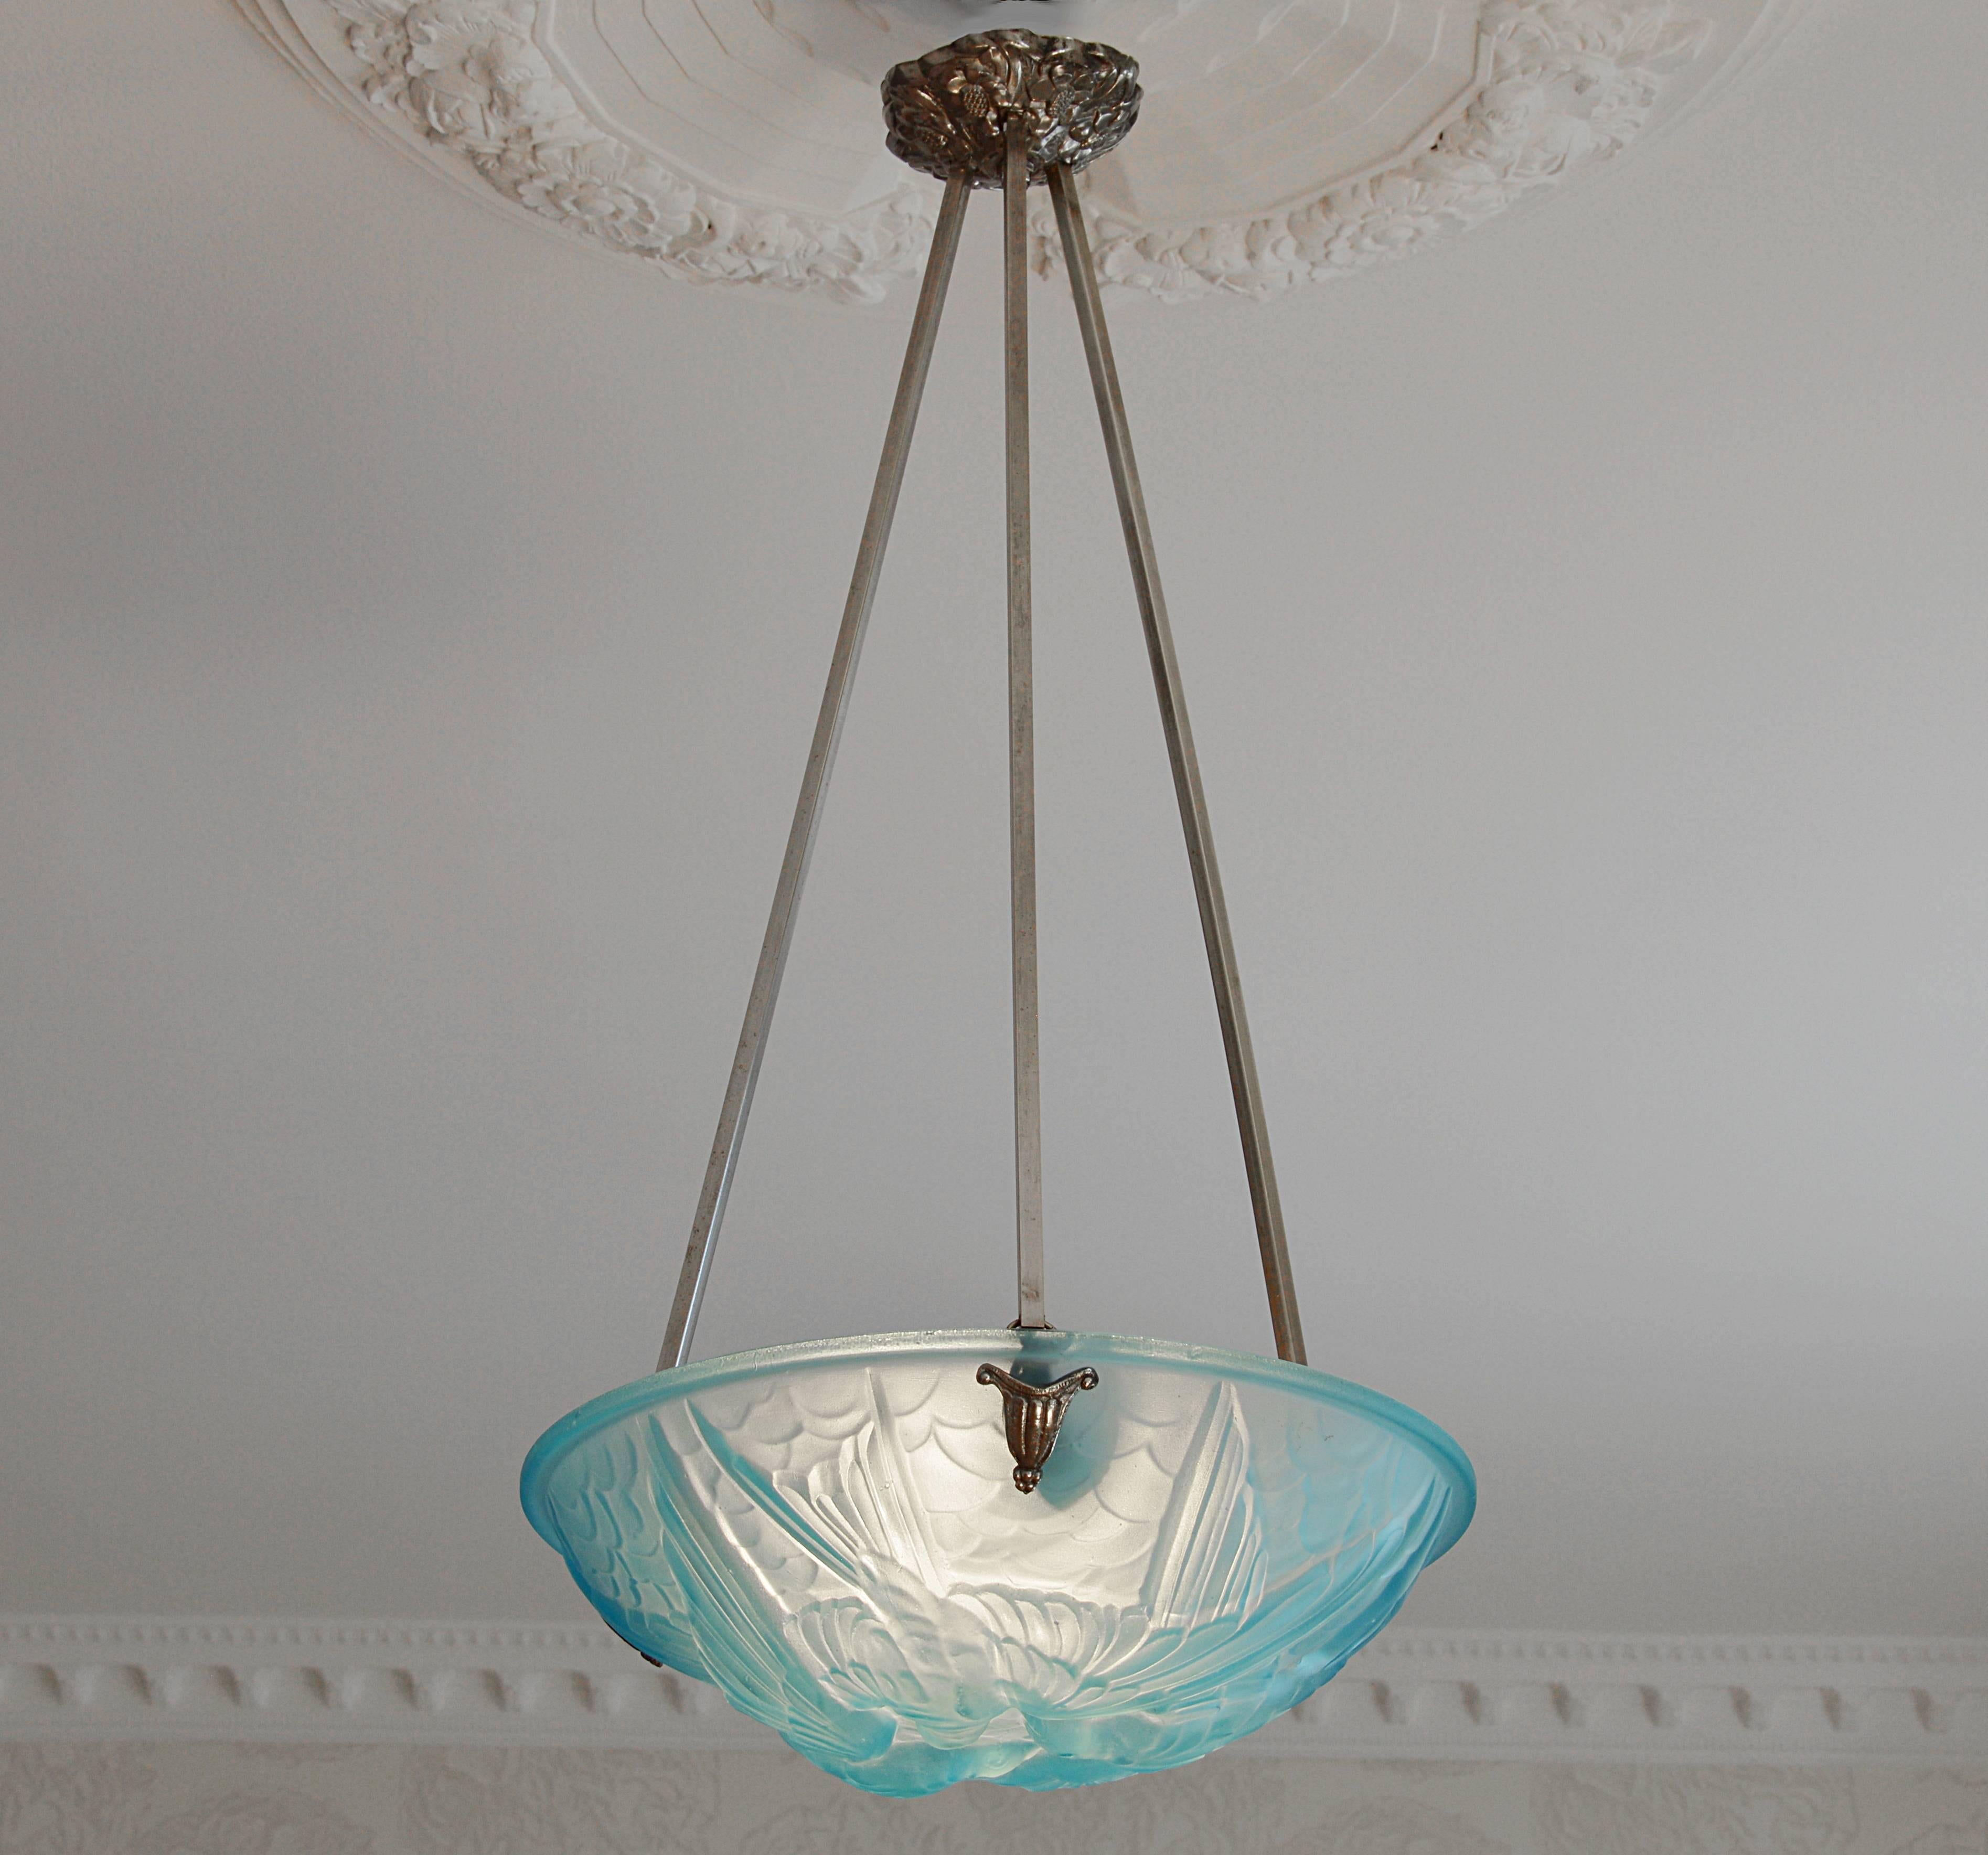 French Art Deco pendant chandelier by Jean Noverdy (Dijon), France, late 1920s. Frosted blue glass shade. Three swallow pattern. Original brass and bronze (hidden-holes) fixture. Can be shortened. Delivered wired for your country usage (EU,